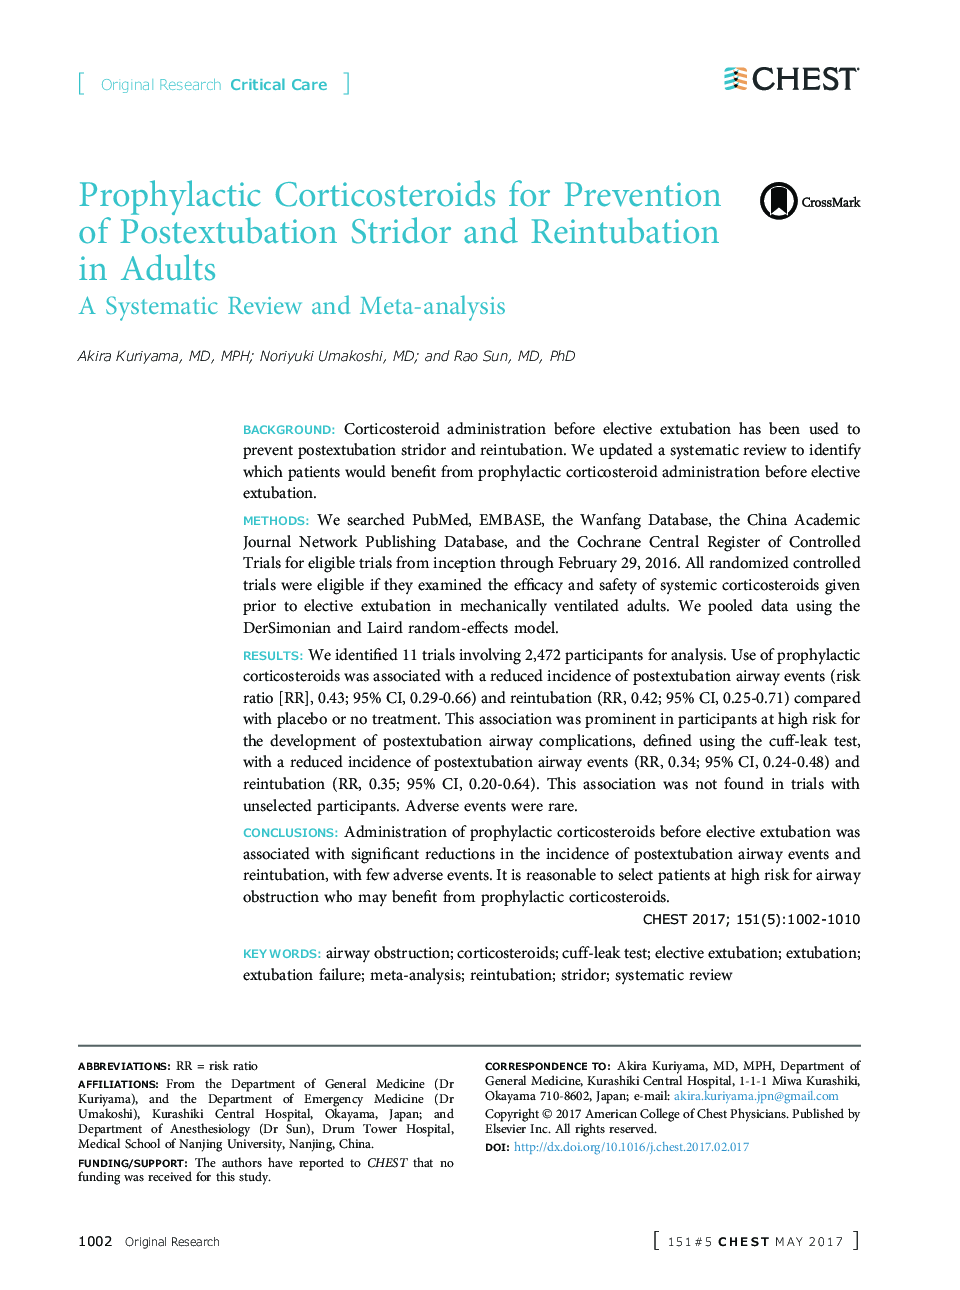 Prophylactic Corticosteroids for Prevention of Postextubation Stridor and Reintubation in Adults